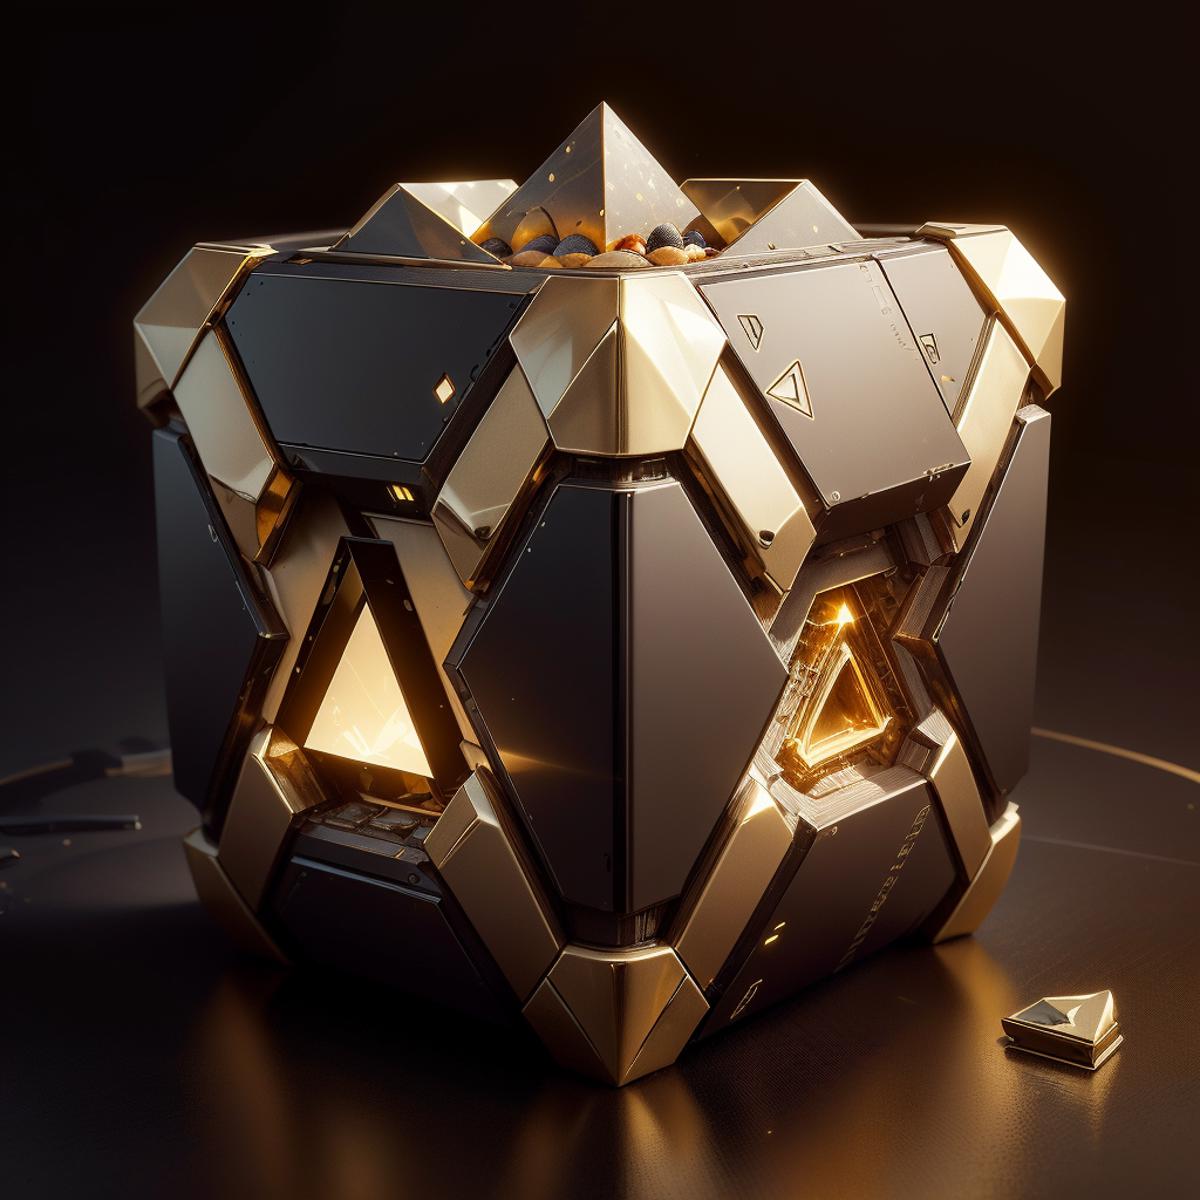 A 3D geometric puzzle box with gold and black triangles.